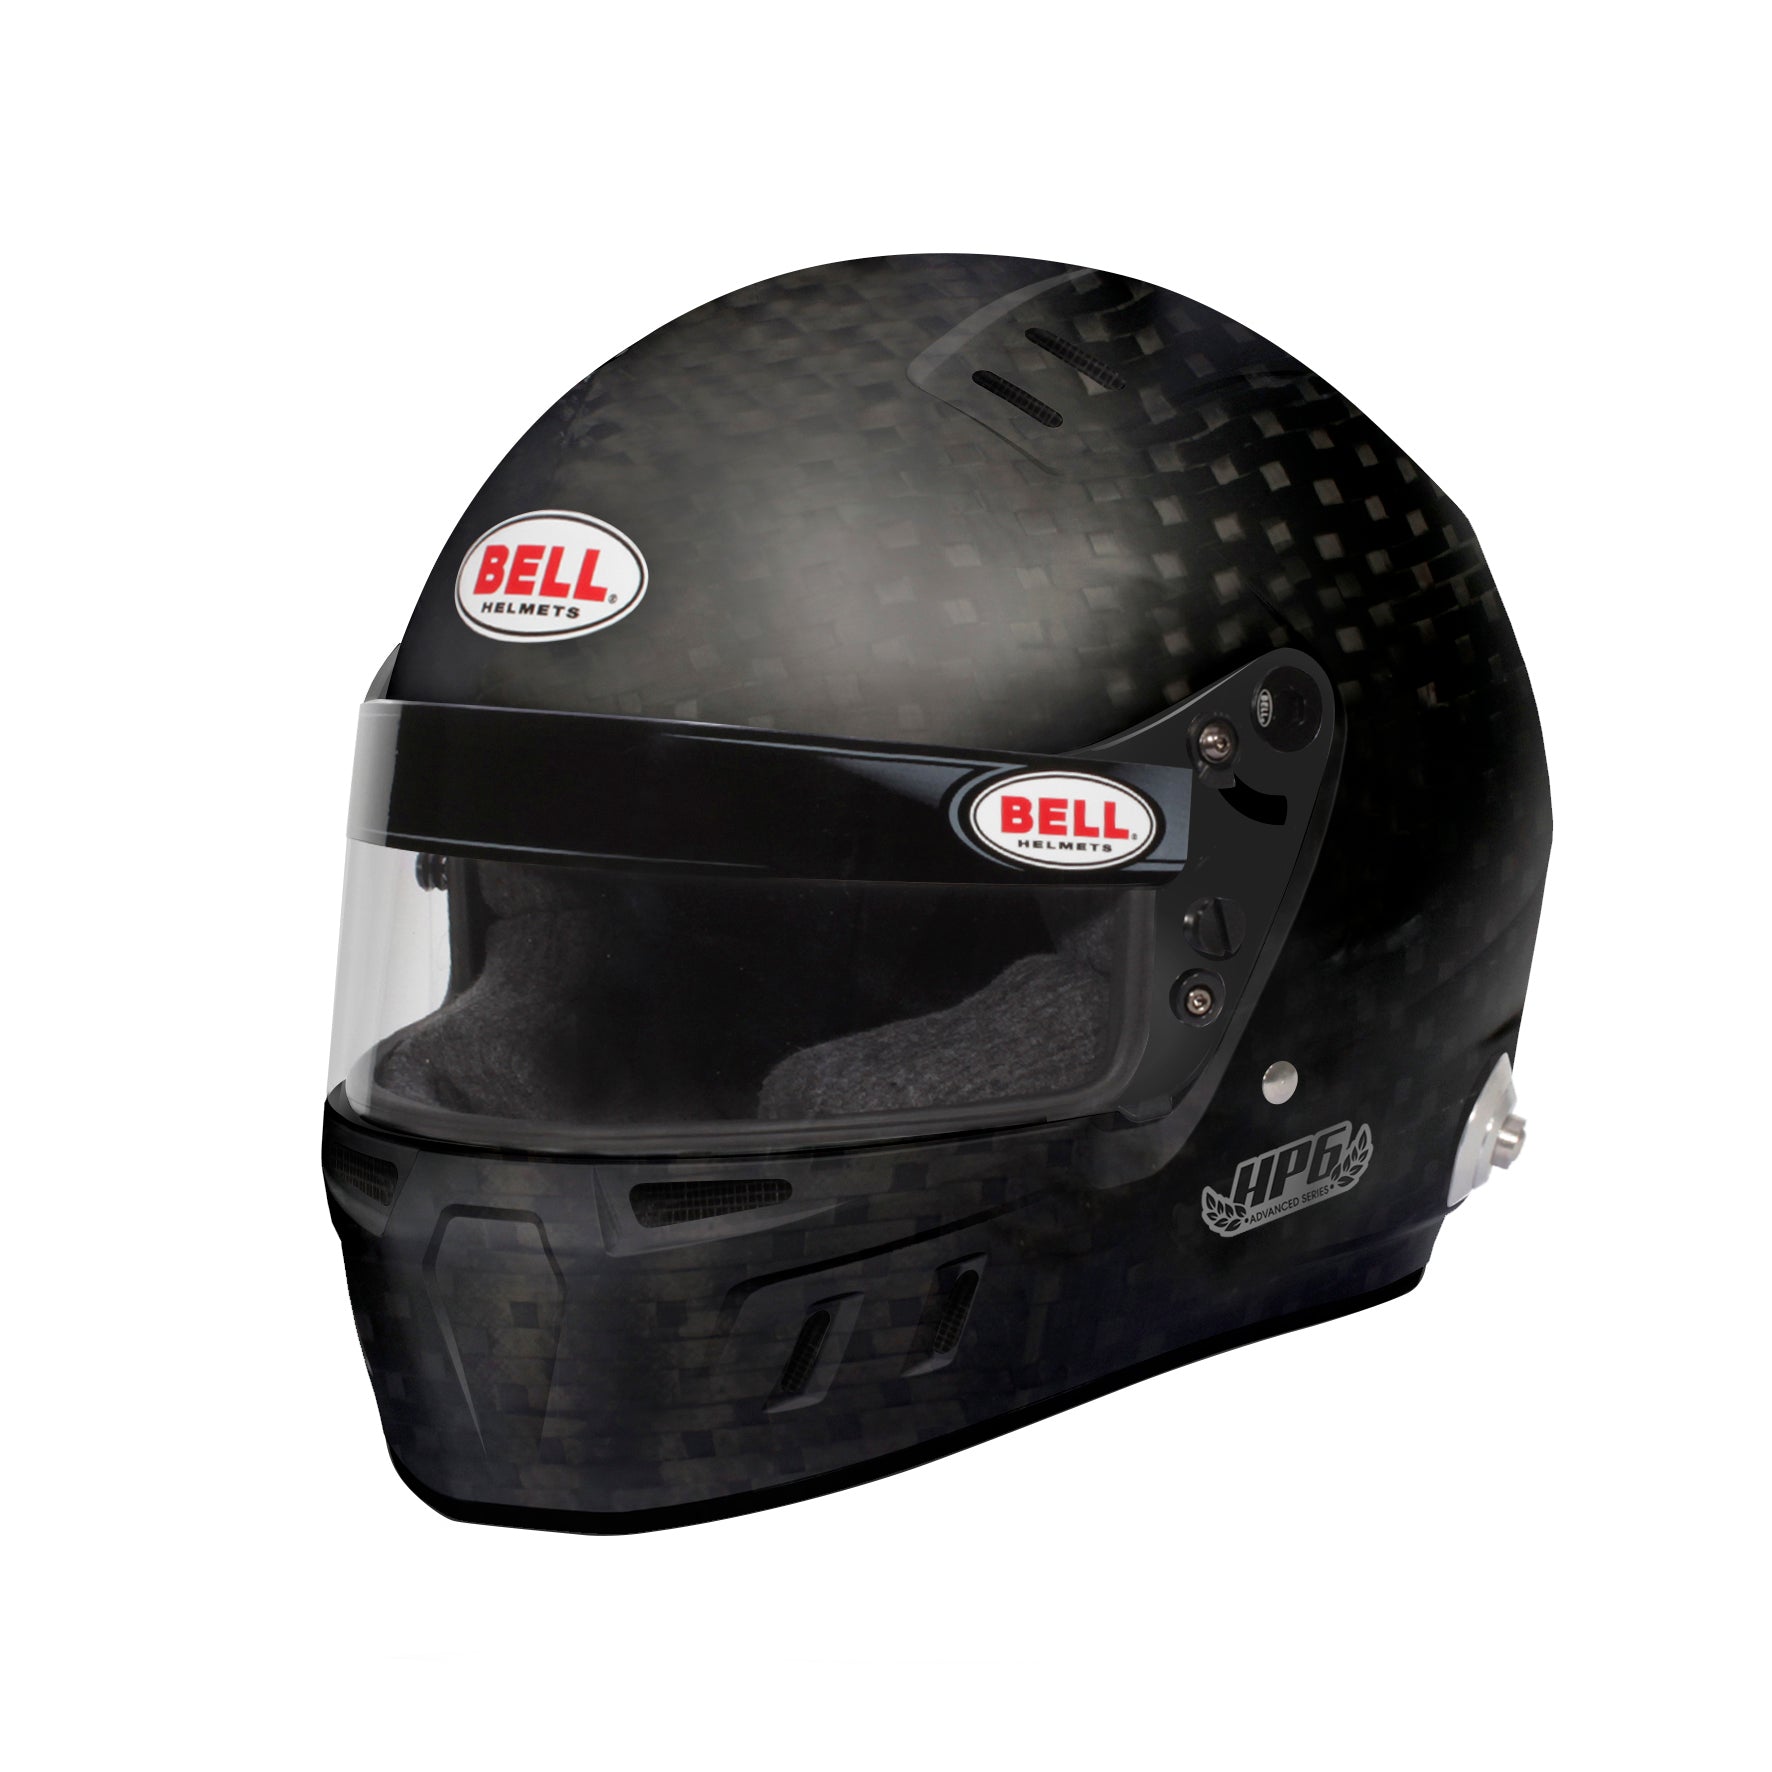 BELL 1140001 HP6 Racing helmet full-face, HANS, FIA8860-2018, carbon, size 54 (6 3/4) Photo-0 